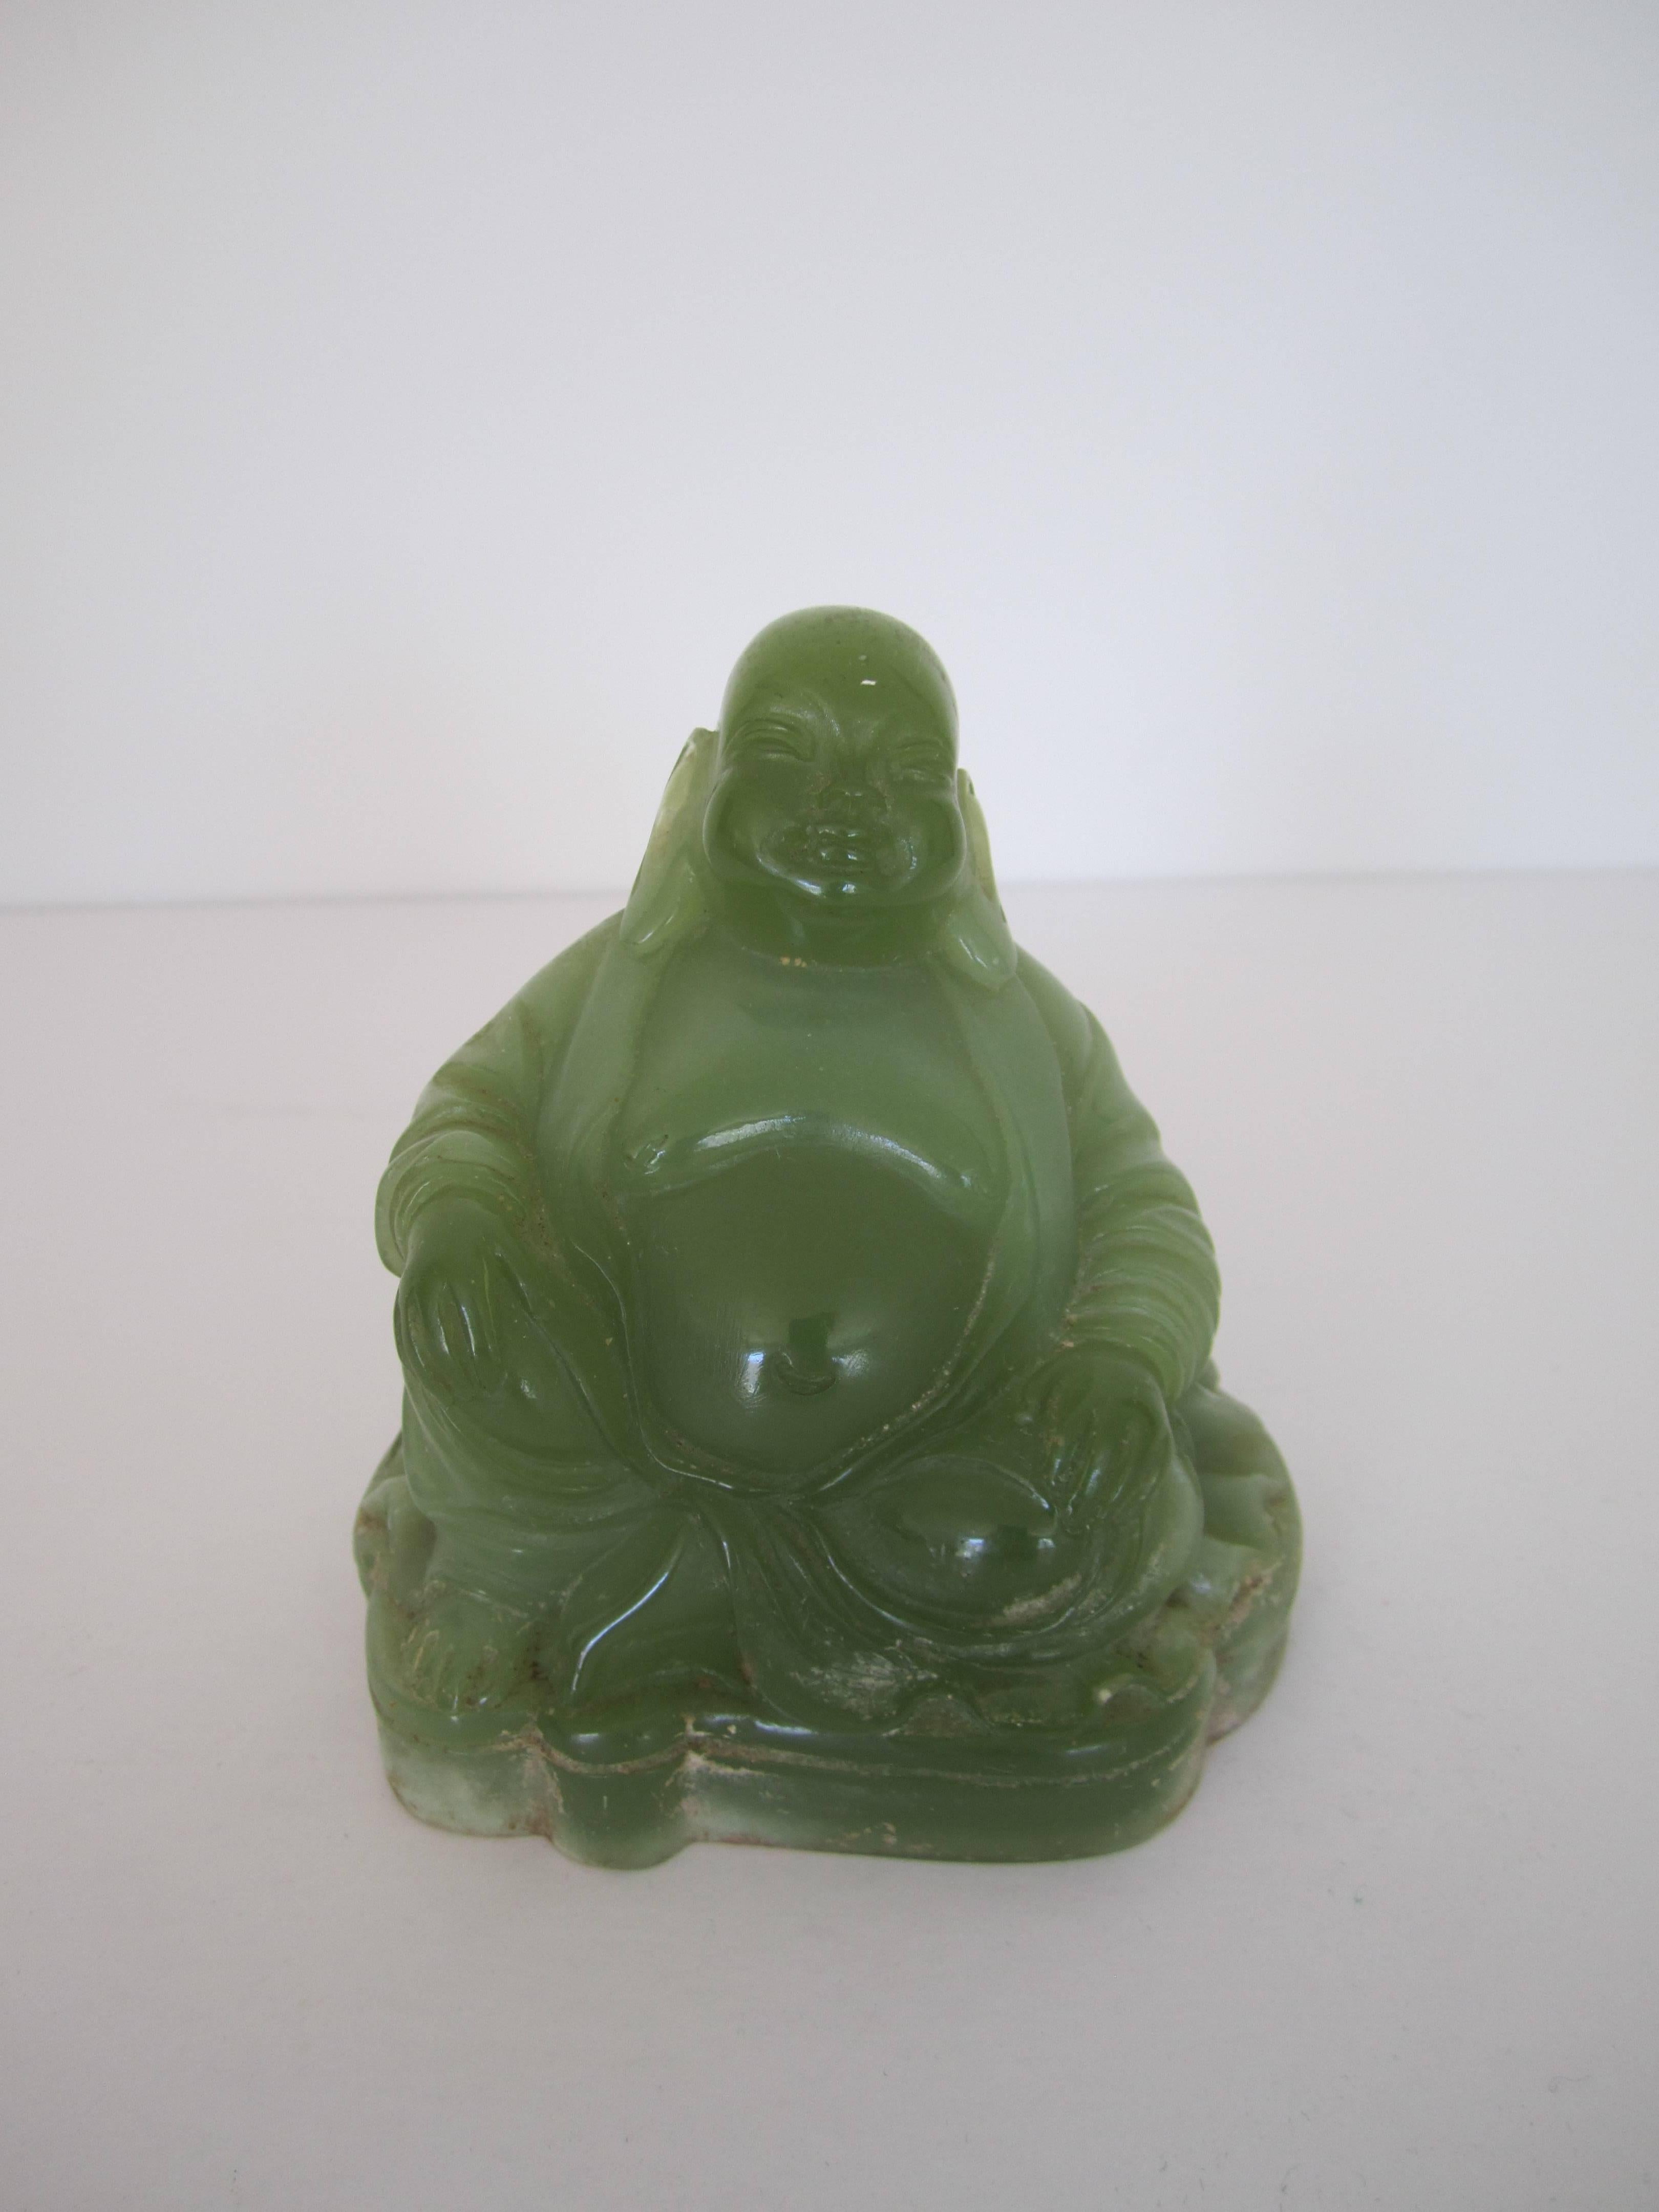 Chinoiserie Vintage Jade Green Resin Seated Buddha Sculpture